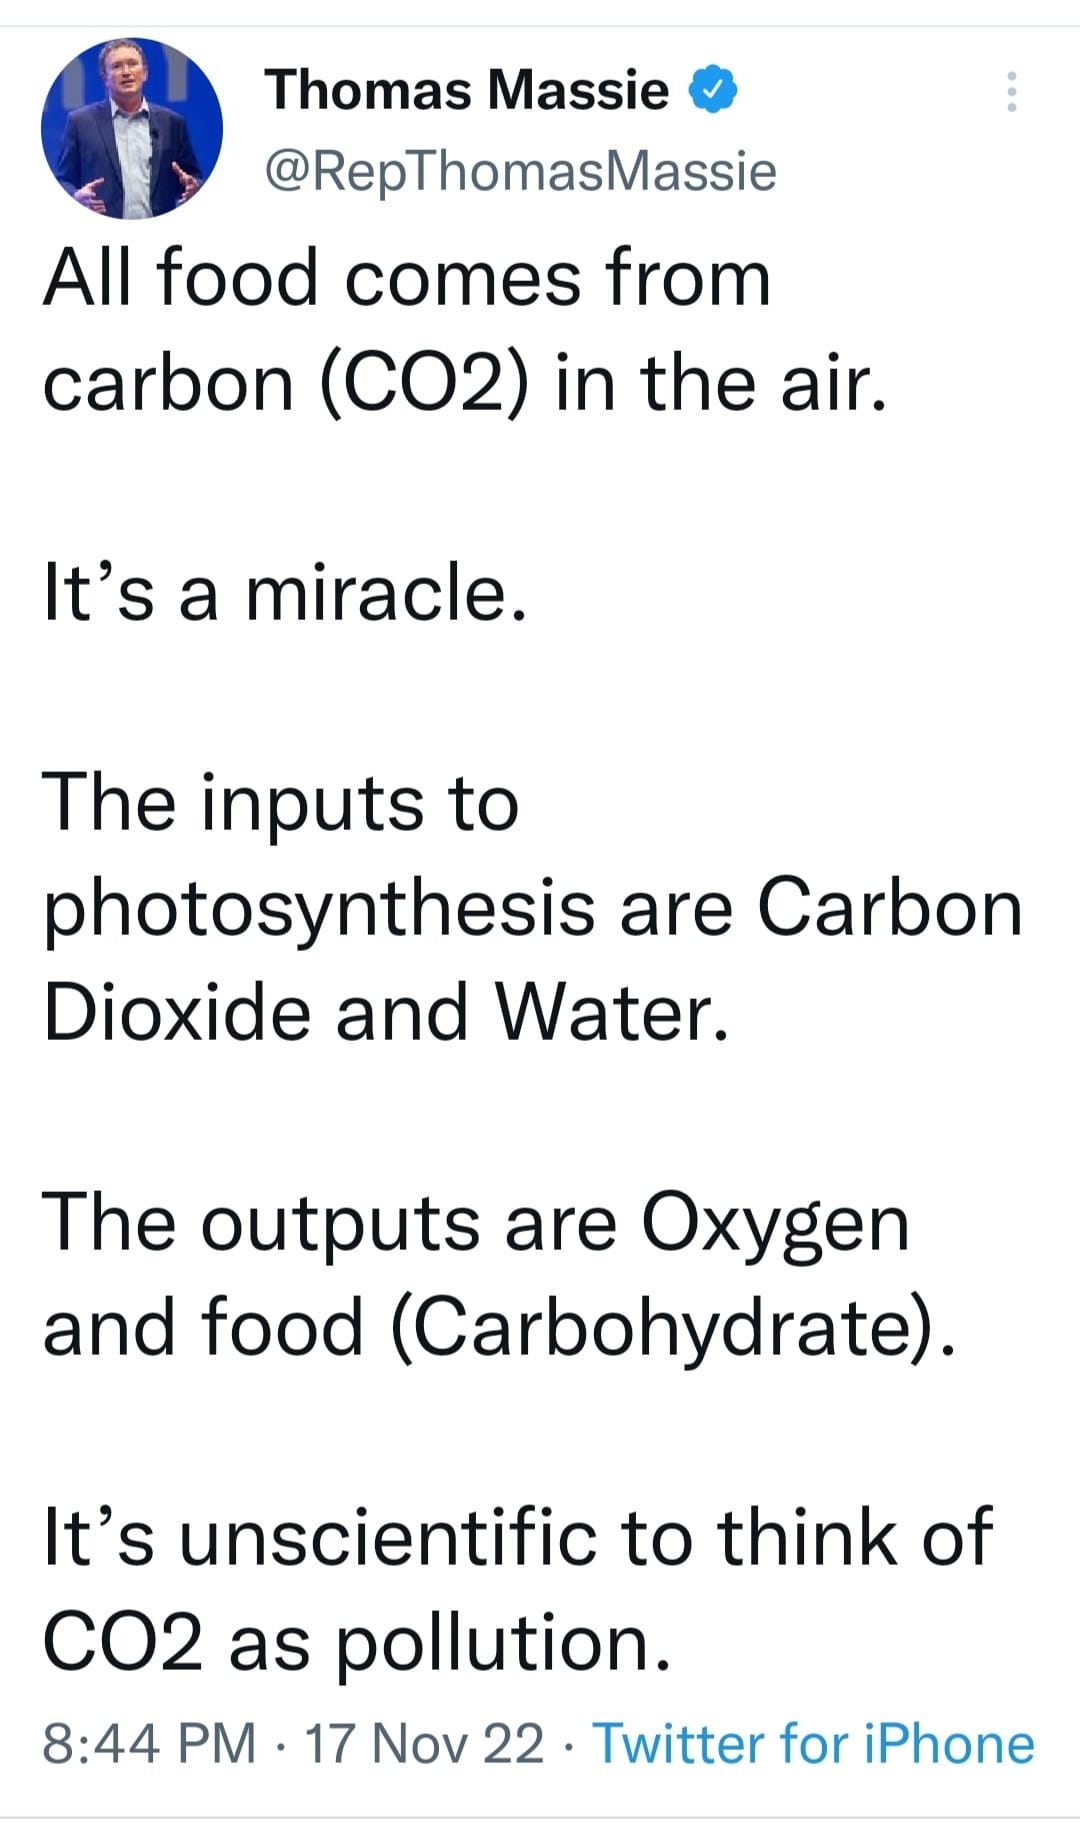 May be an image of 1 person and text that says 'Thomas Massie @RepThomasMassie All food comes from carbon (CO2) in the air. It's a miracle. The inputs to photosynthesis are Carbon Dioxide and Water. The outputs are Oxygen and food (Carbohydrate). It's unscientific to think of CO2 as pollution. 8:44 PM 17 Nov 22 Twitter for iPhone'